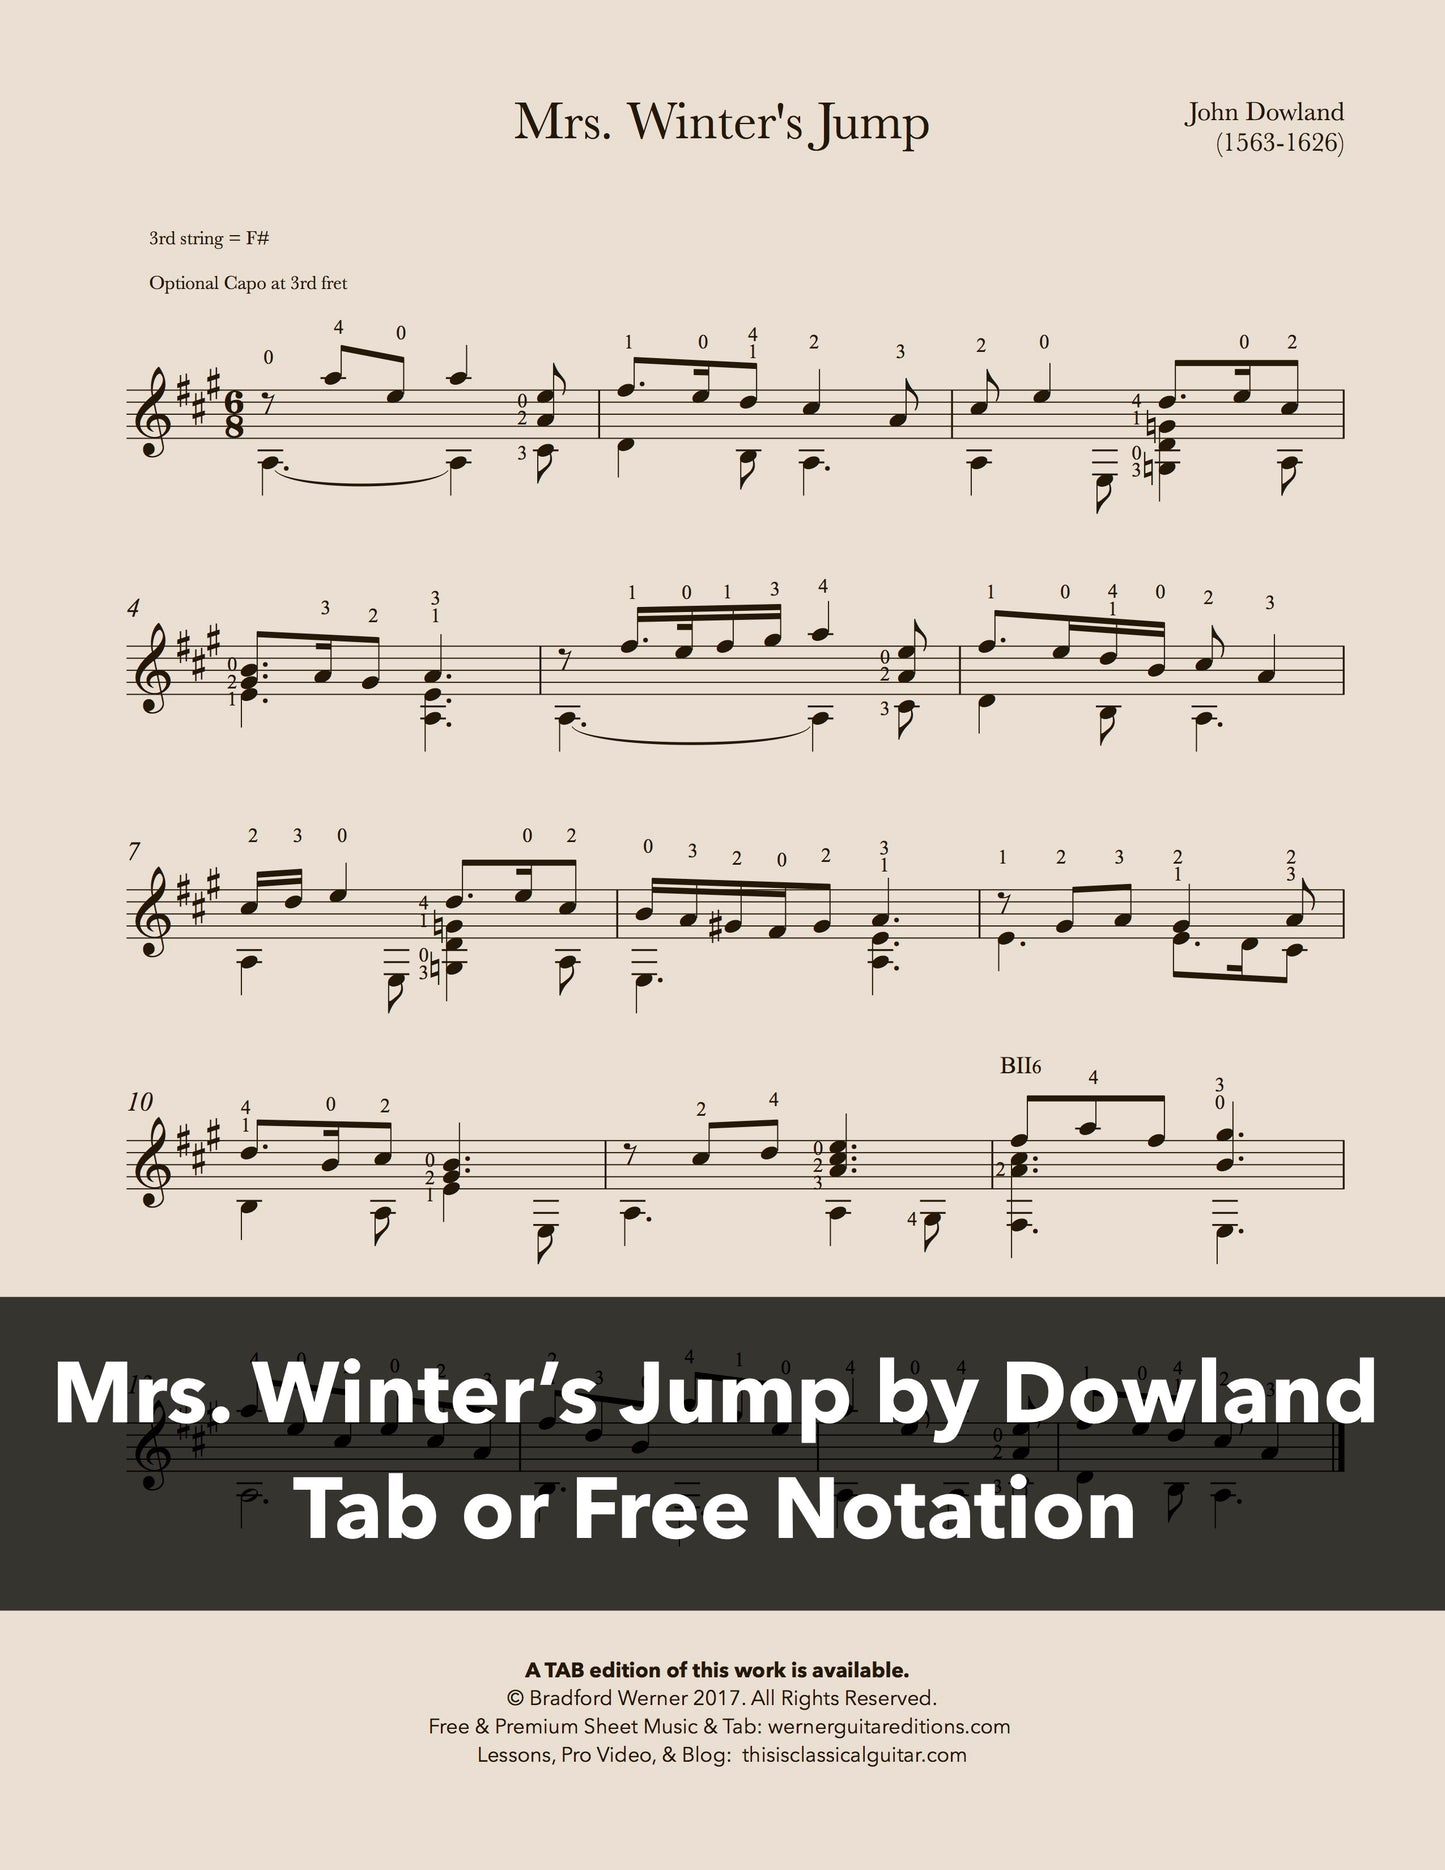 Mrs Winter’s Jump by Dowland (Free PDF)